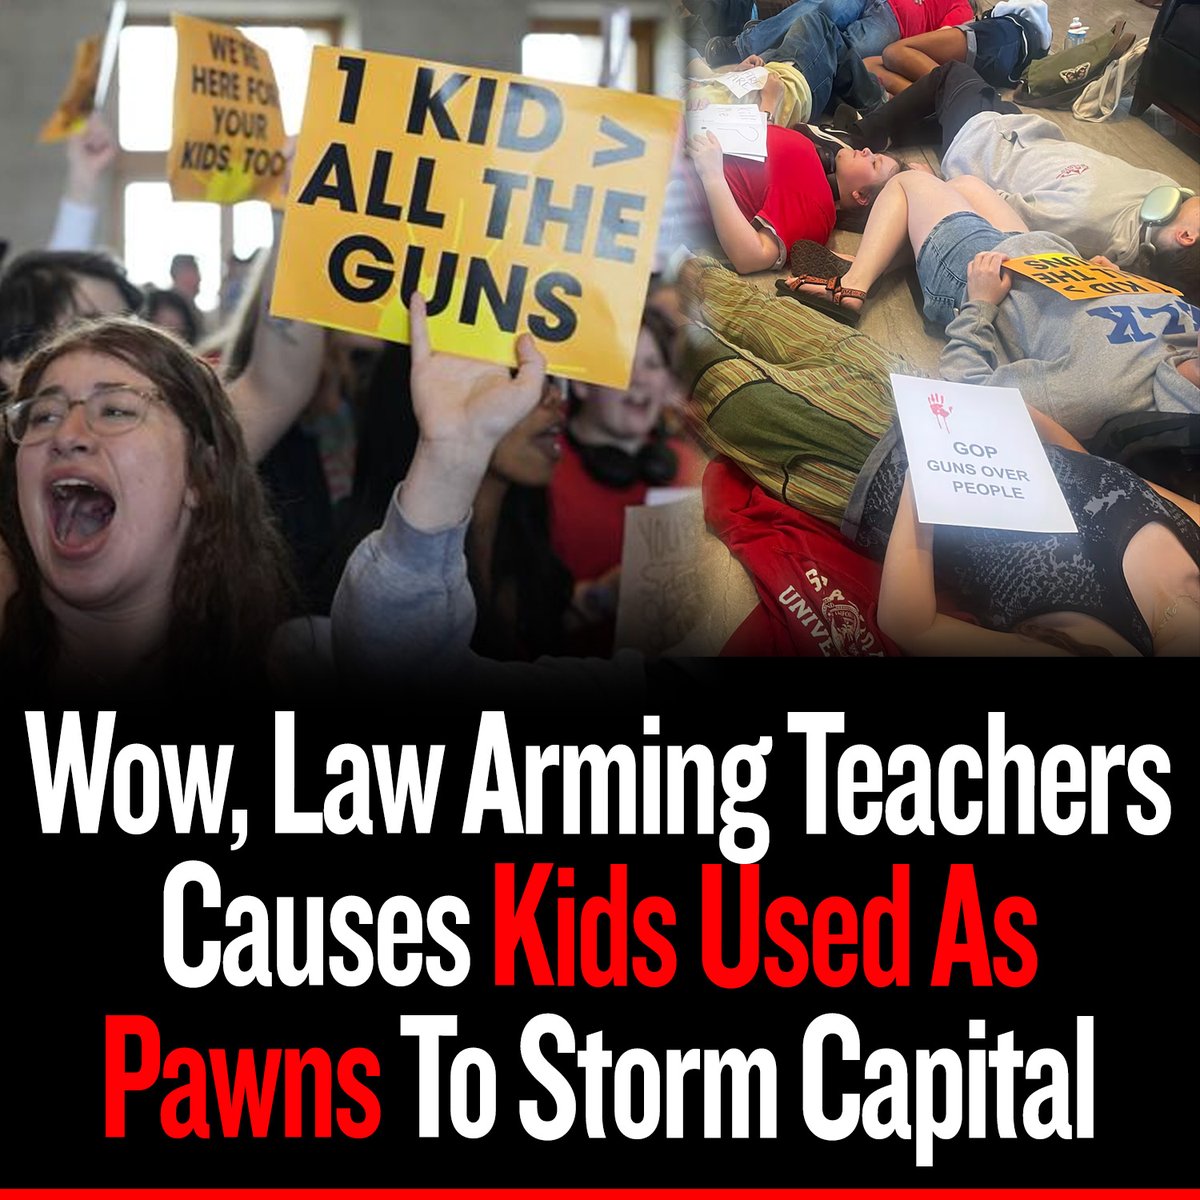 🎬: youtu.be/7A3zBe1zWRg I'm sick and tired of the anti-gun lobby using kids as pawns to manipulate people's emotions to get them to make irrational decisions on gun control. How is this any different than Mao's Red Guard, where he used the misguided youth as his pawns to…